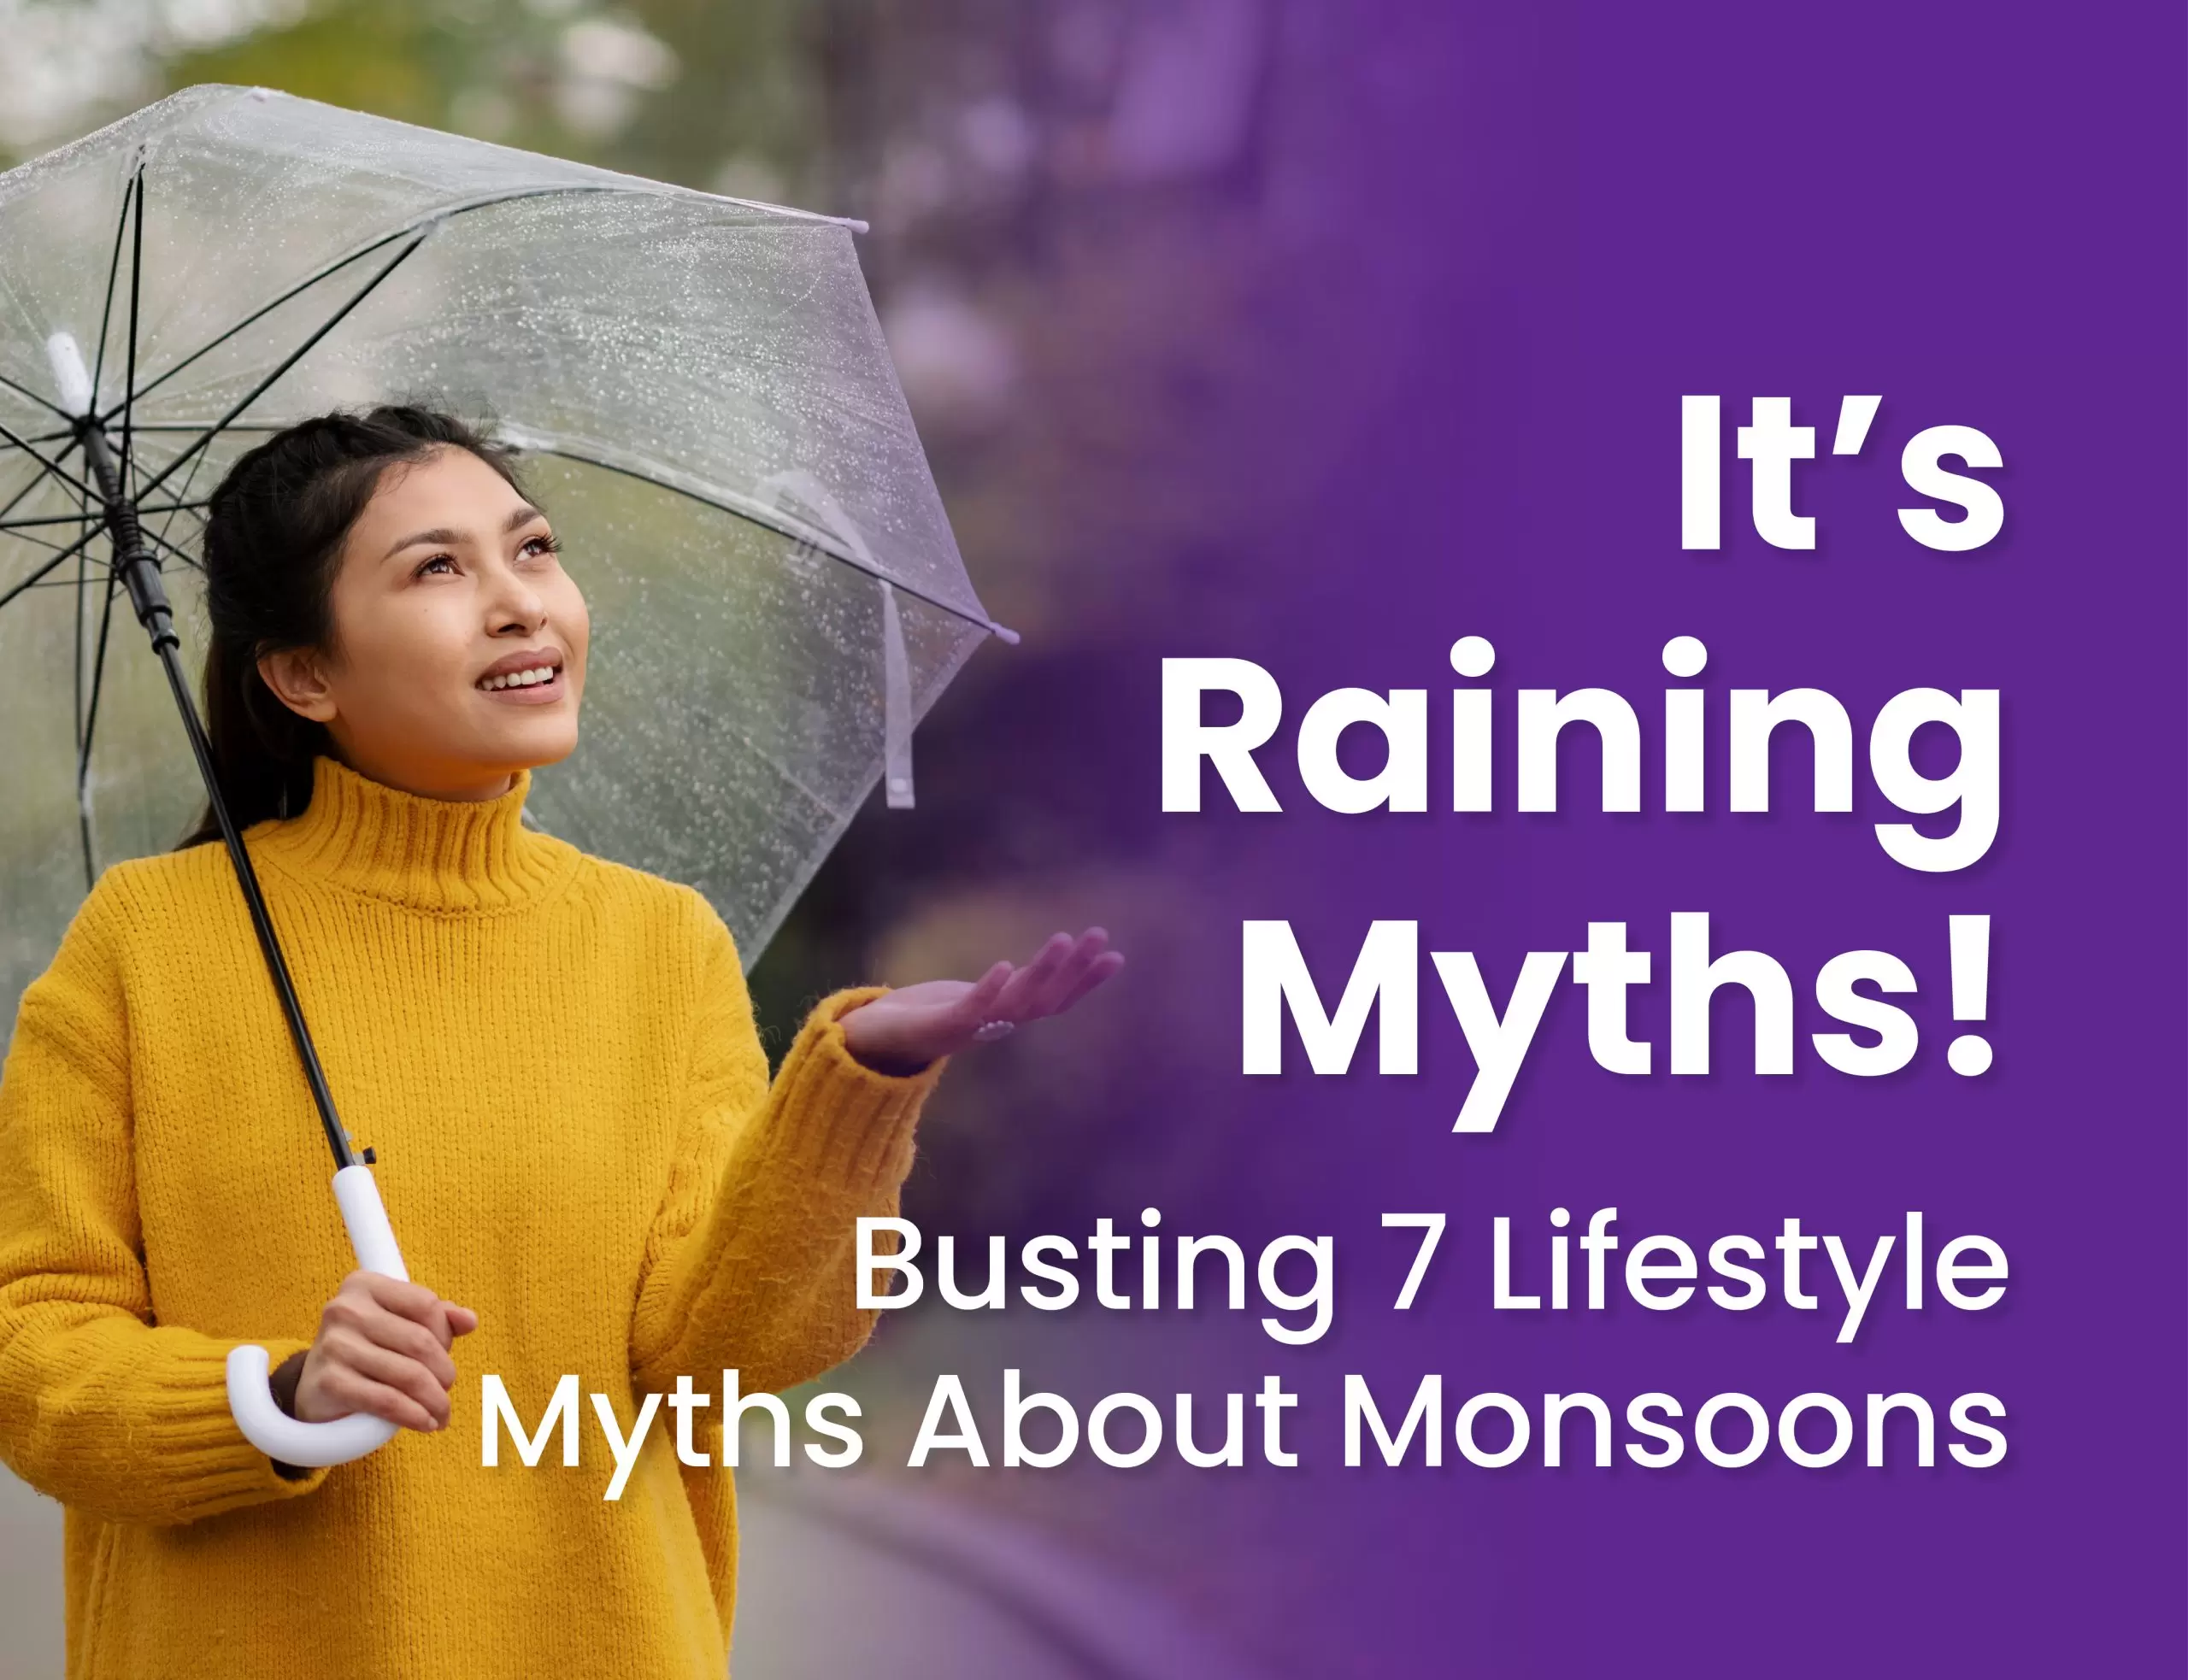 It’s Raining Myths! Busting 7 Lifestyle Myths About Monsoons